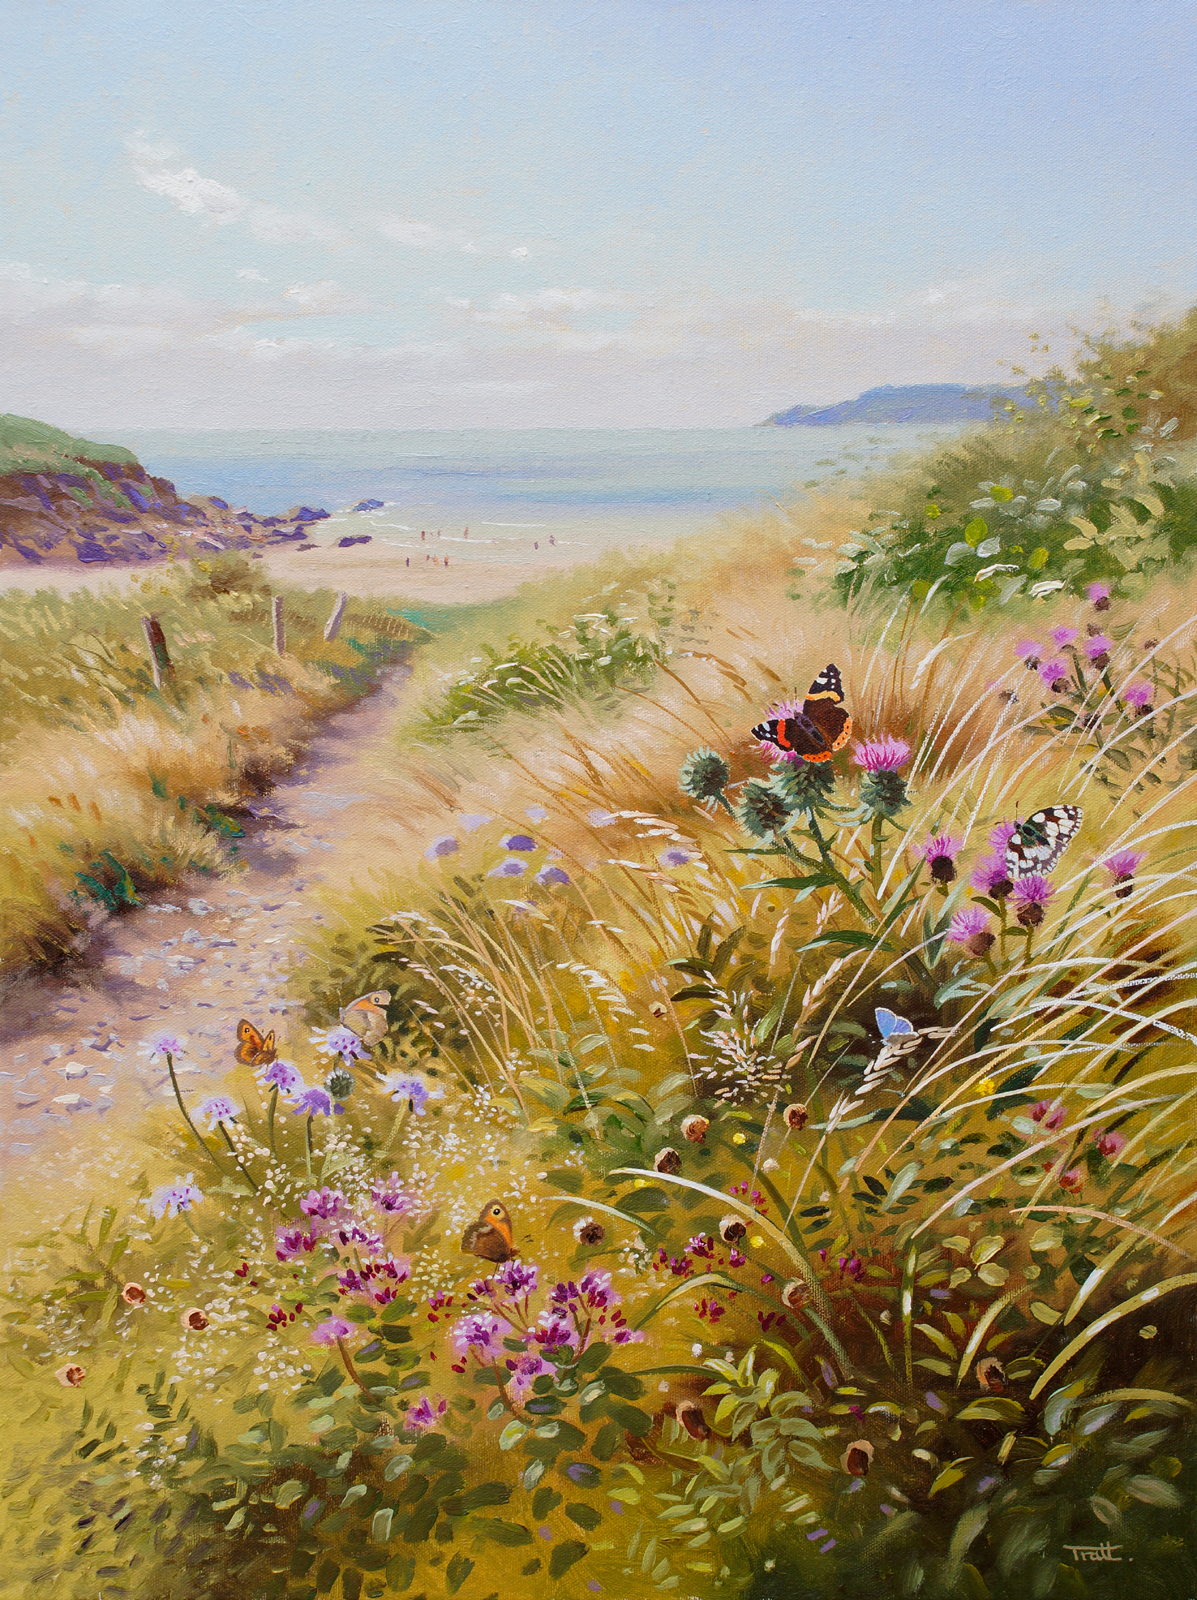 <p>Butterflies on the South Wes Coast by Richard Tratt</p>